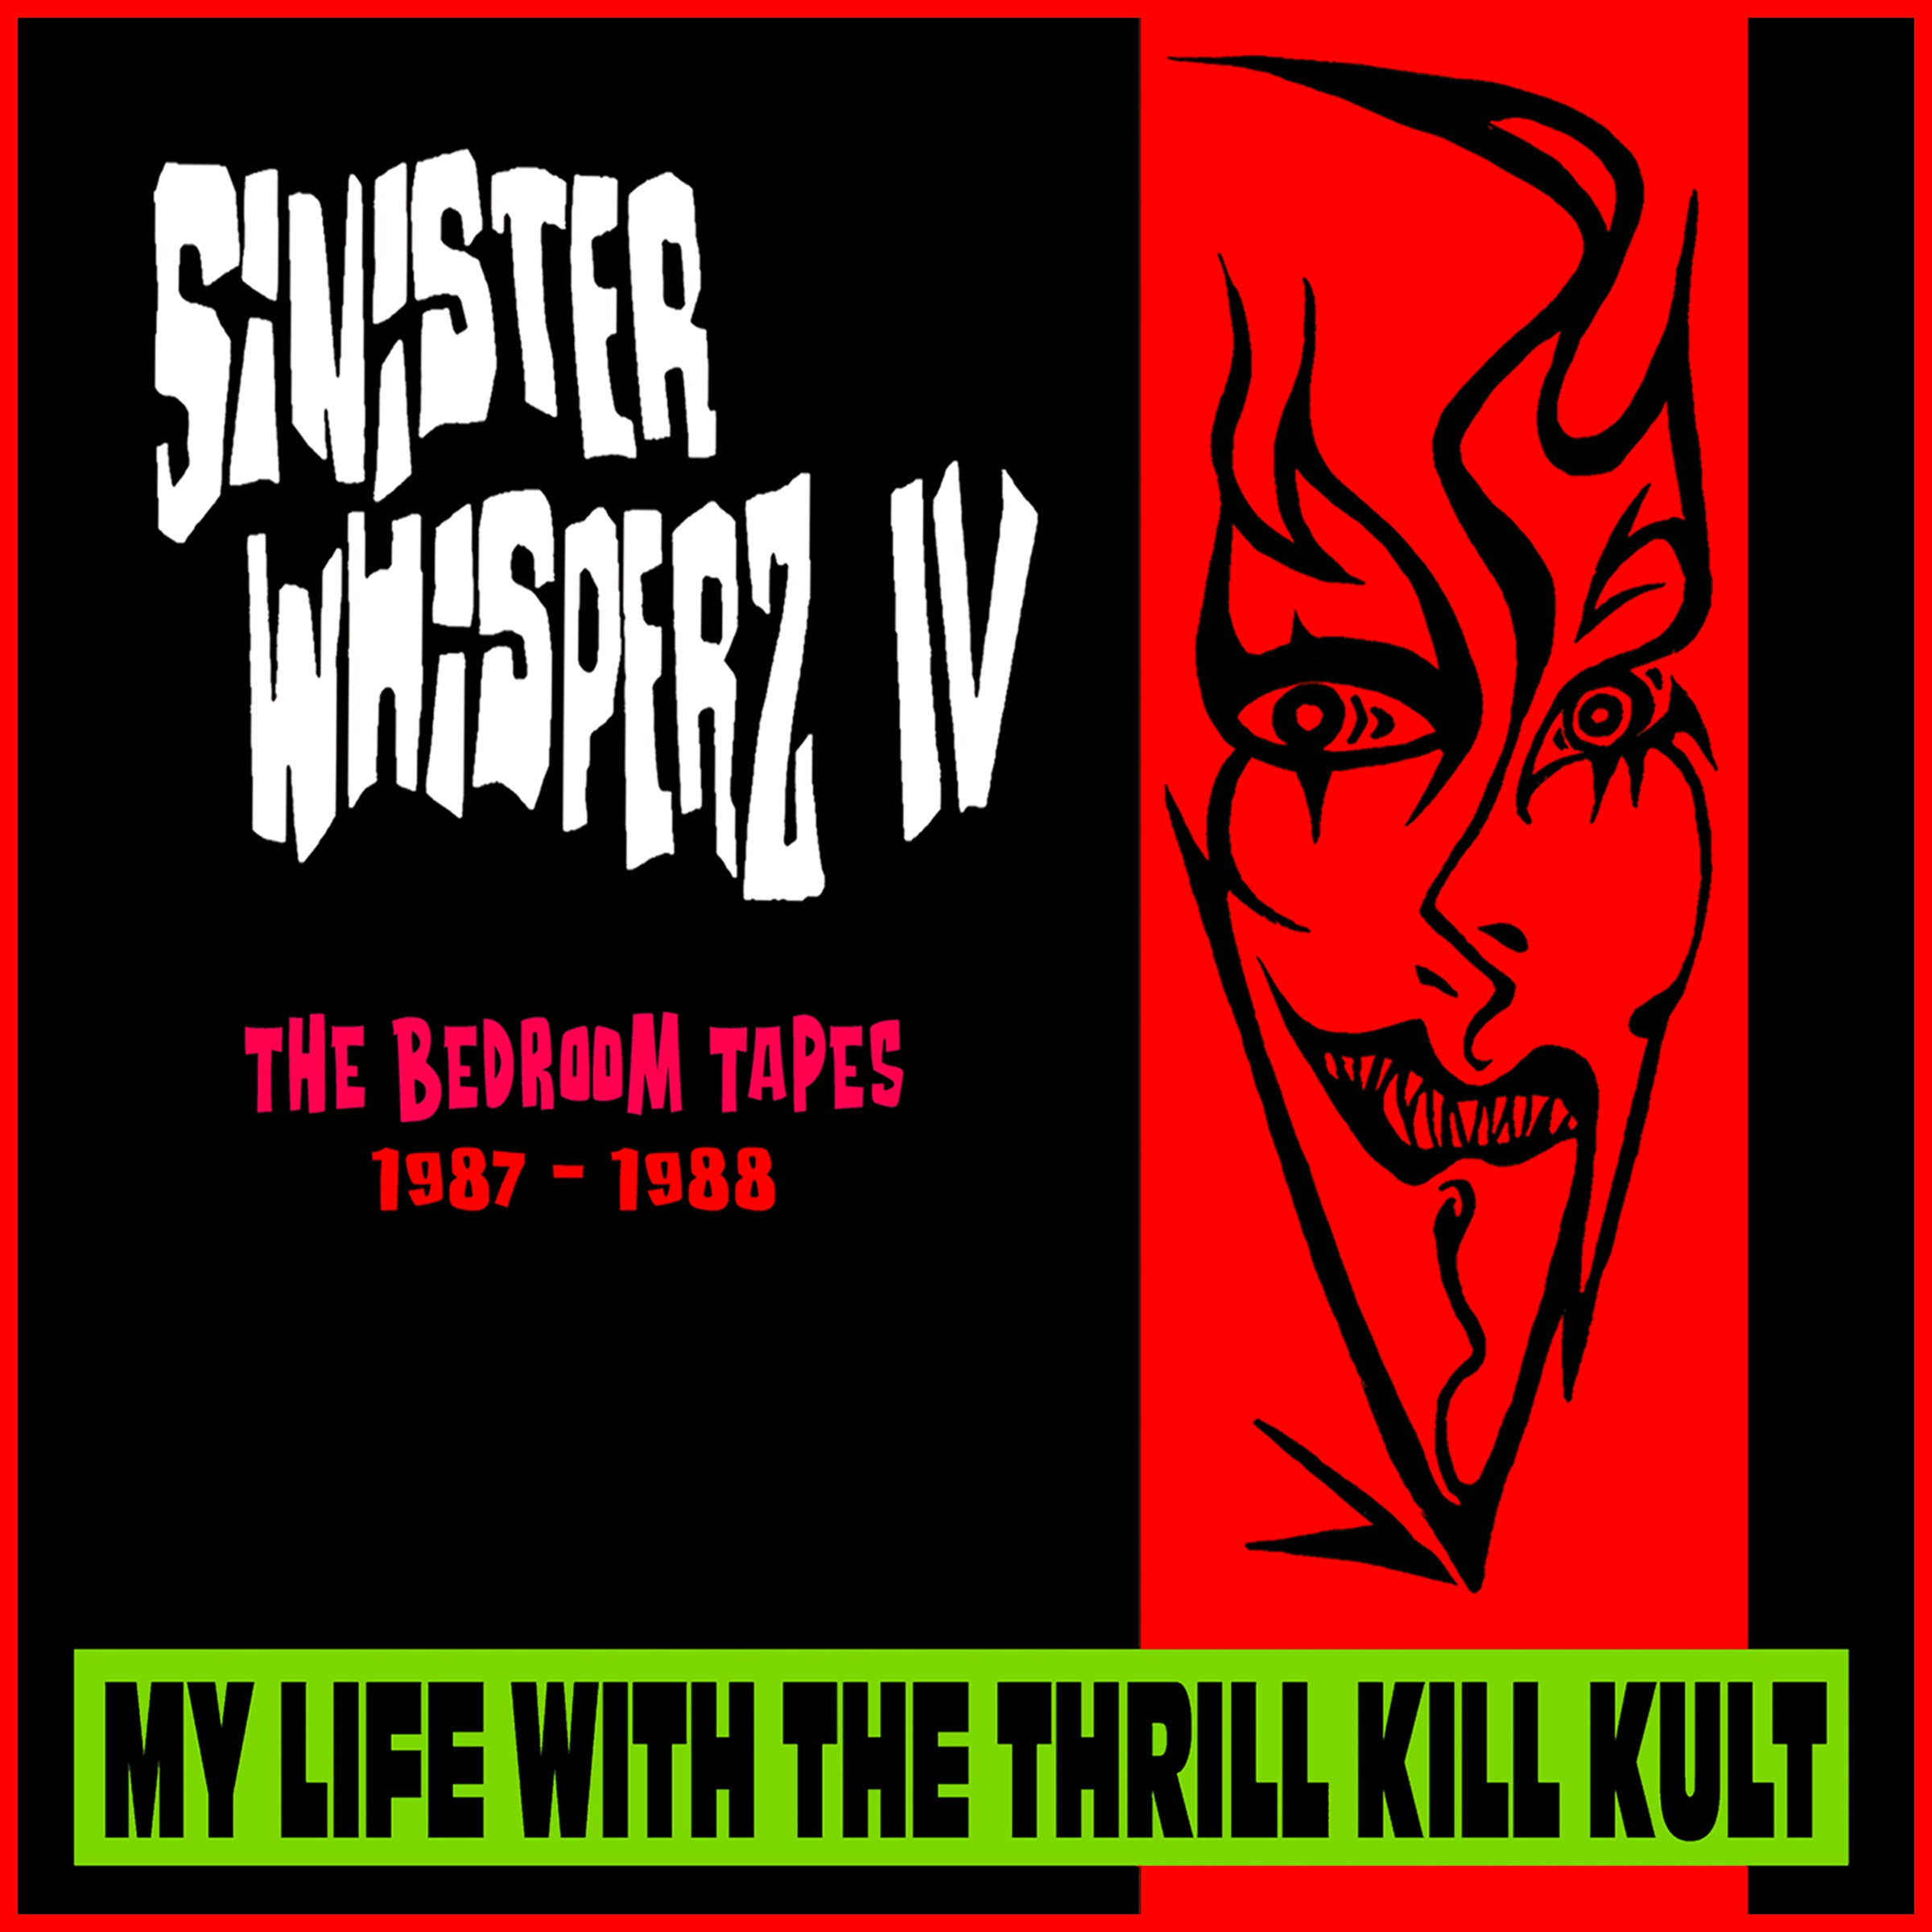 My Life With The Thrill Kill Kult – Sinister Whisperz IV: The Bedroom Tapes (1987-1988)